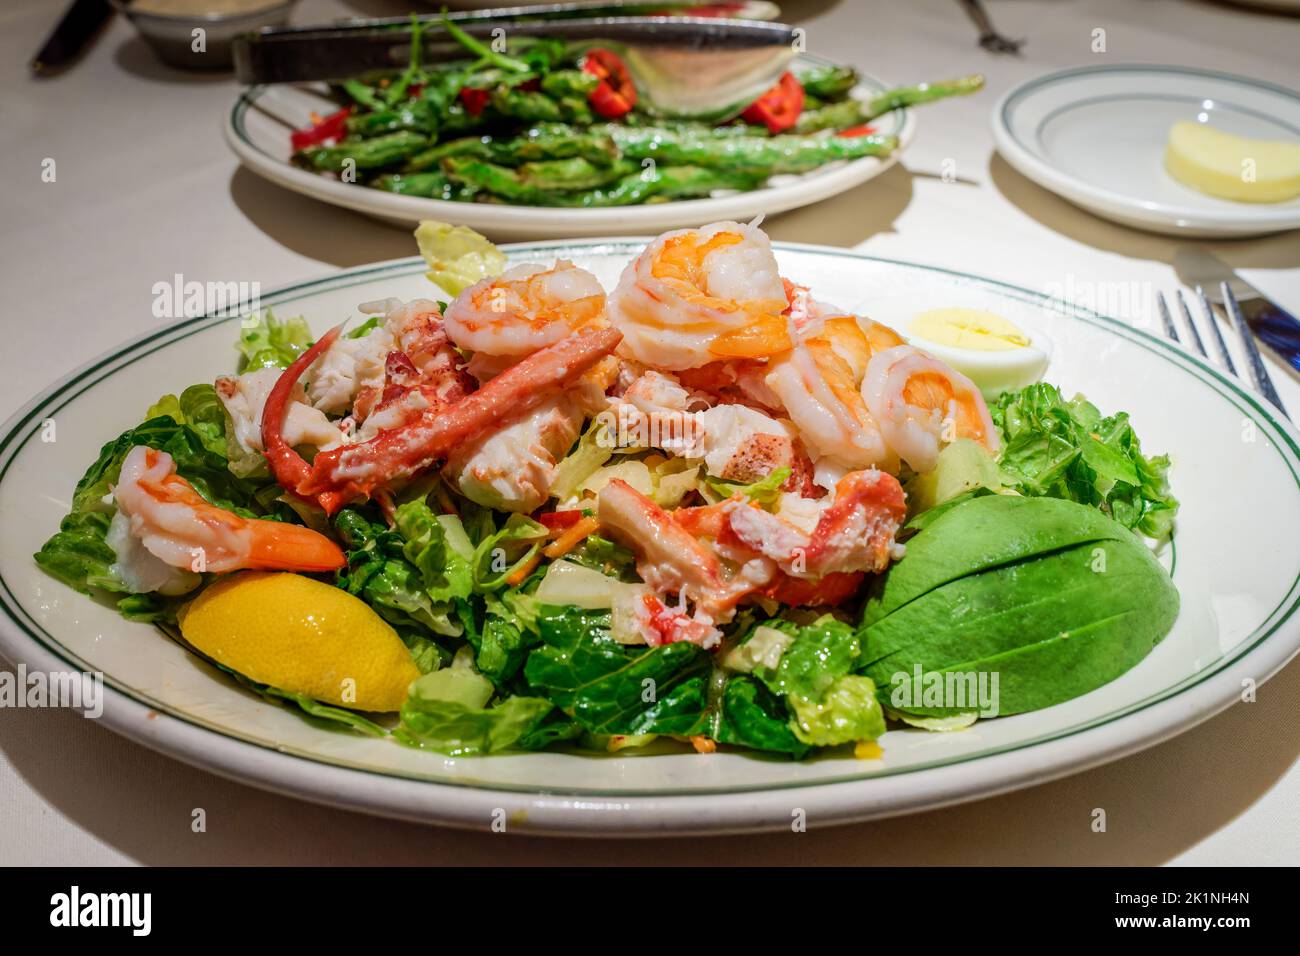 selective focus on seafood salad plate with crab, shrimp and lobster as well as avocado and lemon wedge Stock Photo